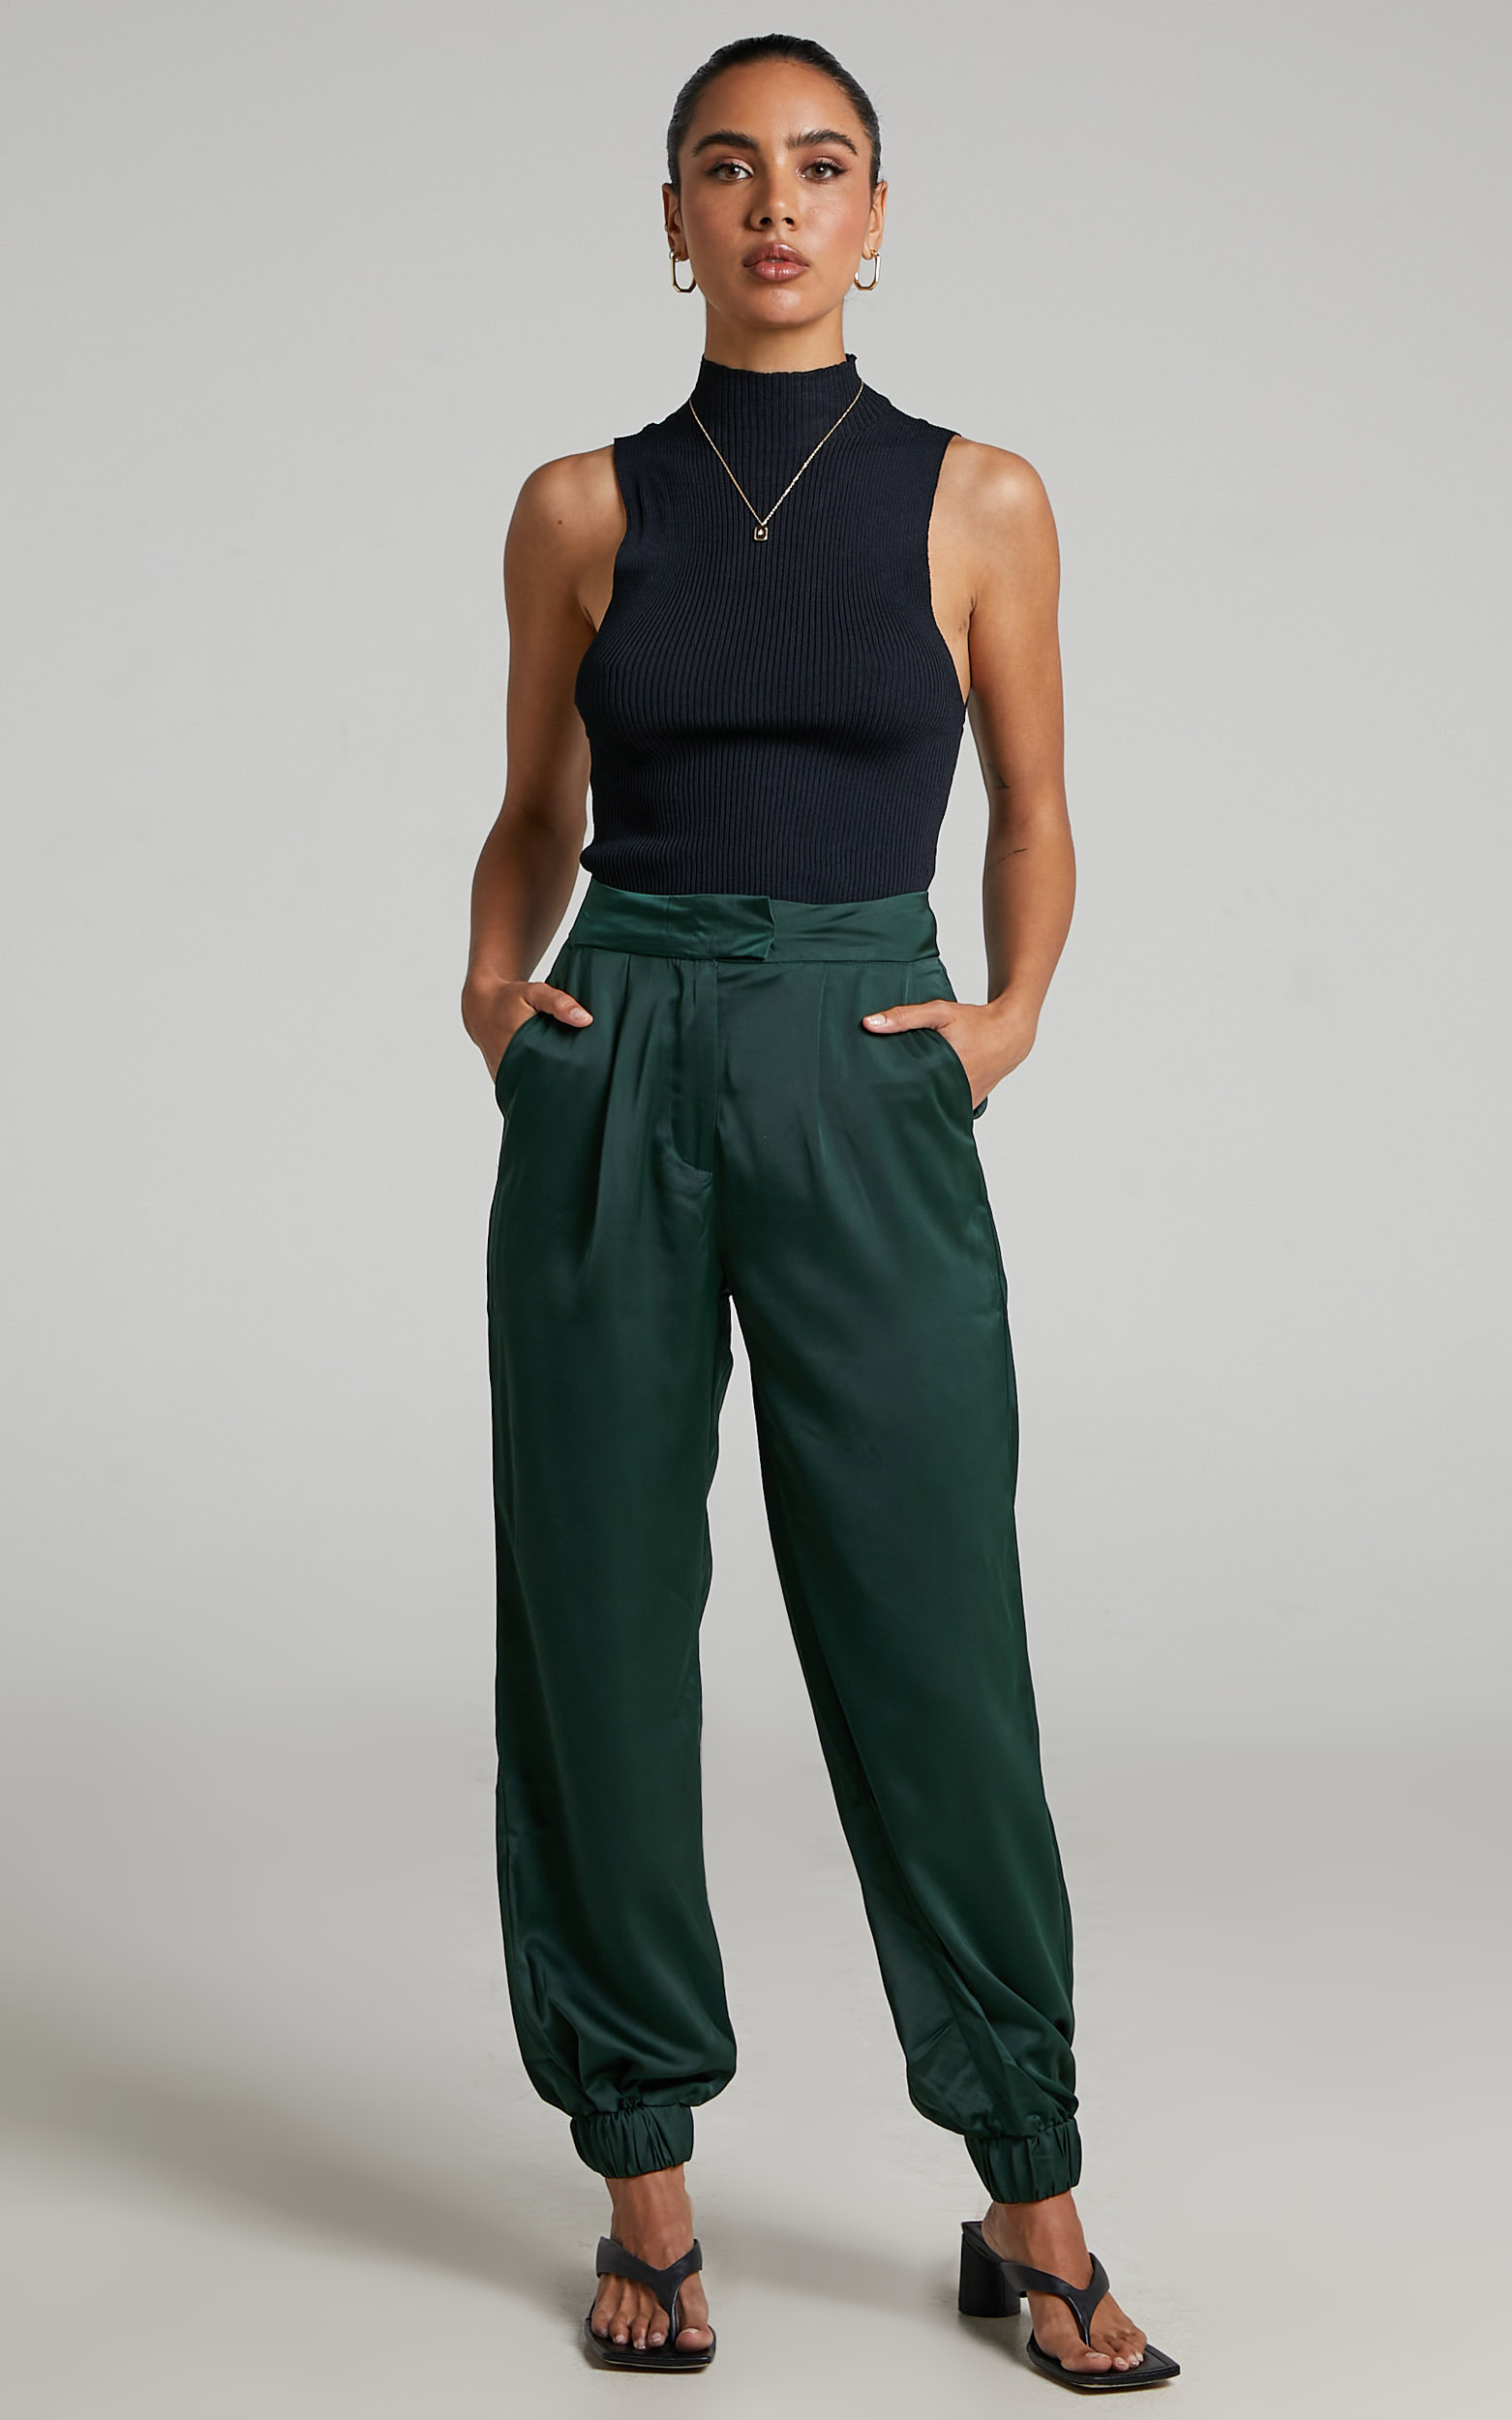 4th & Reckless - Elina Satin Jogger in Forest Green - 06, GRN1, hi-res image number null